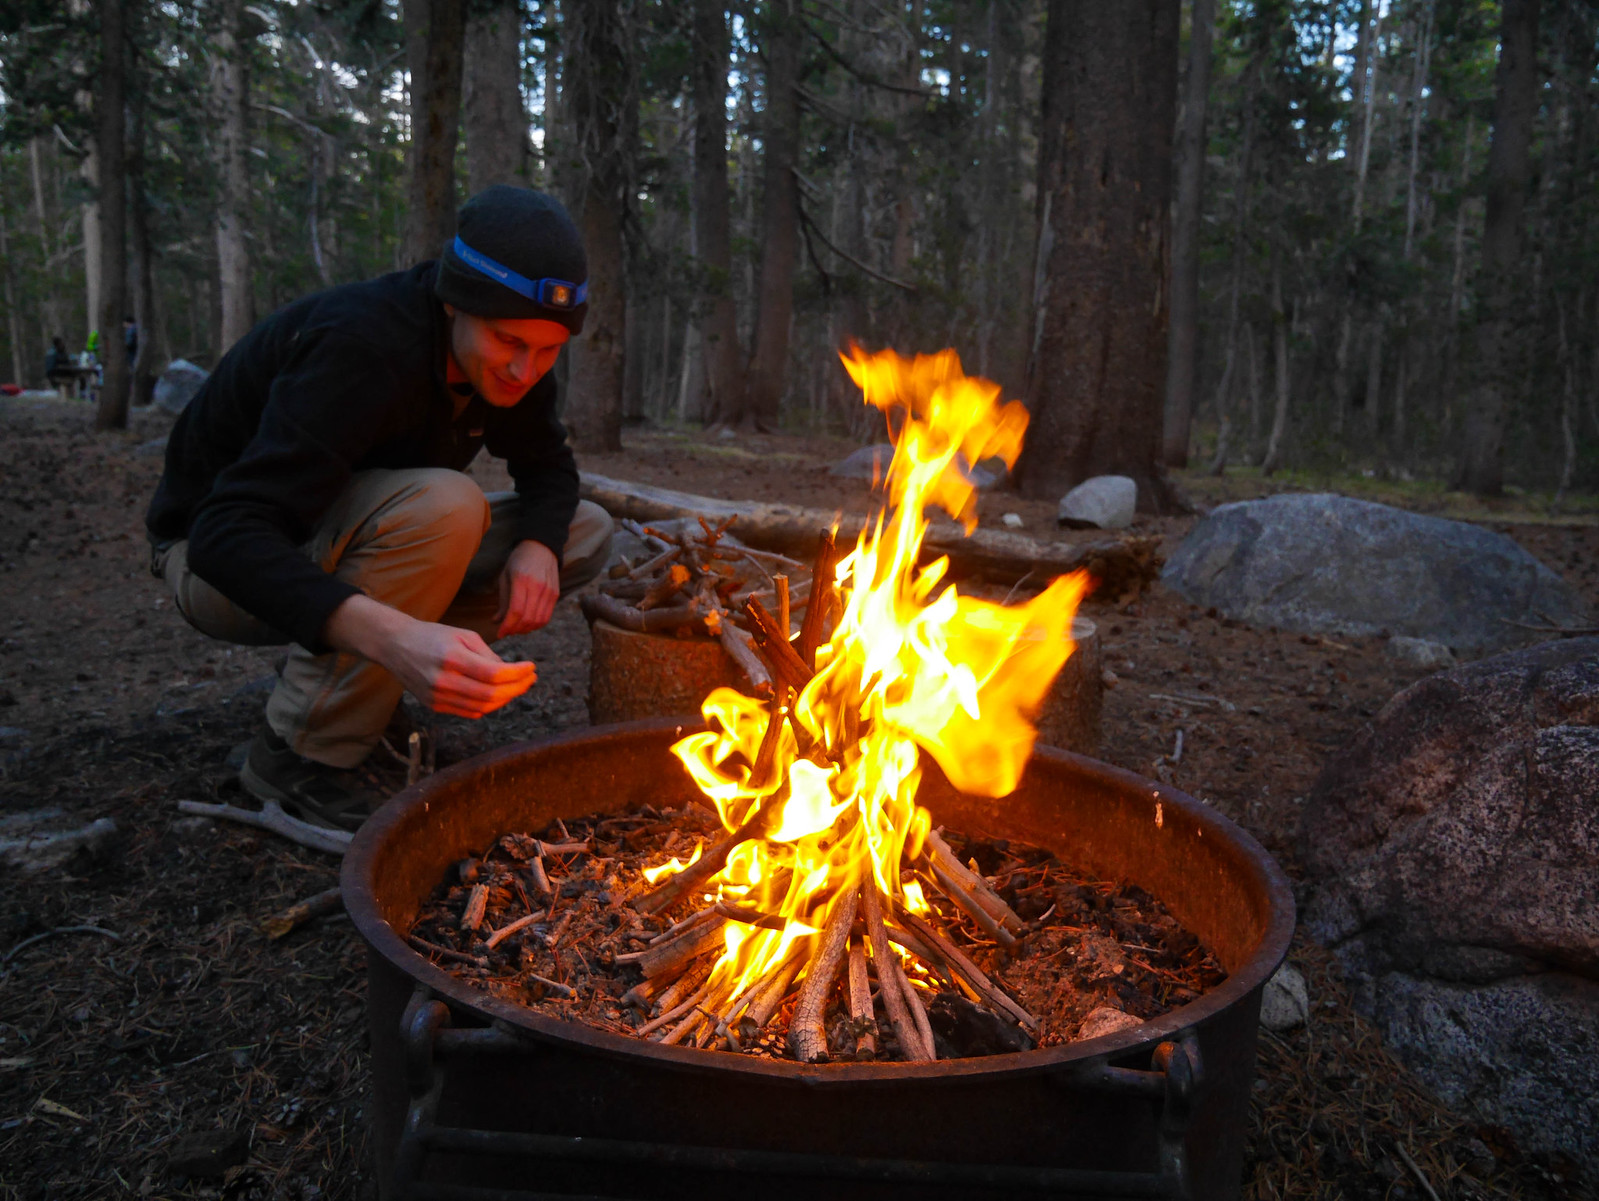 Miles tending fire at Tuolumne BP camp the night before we head out